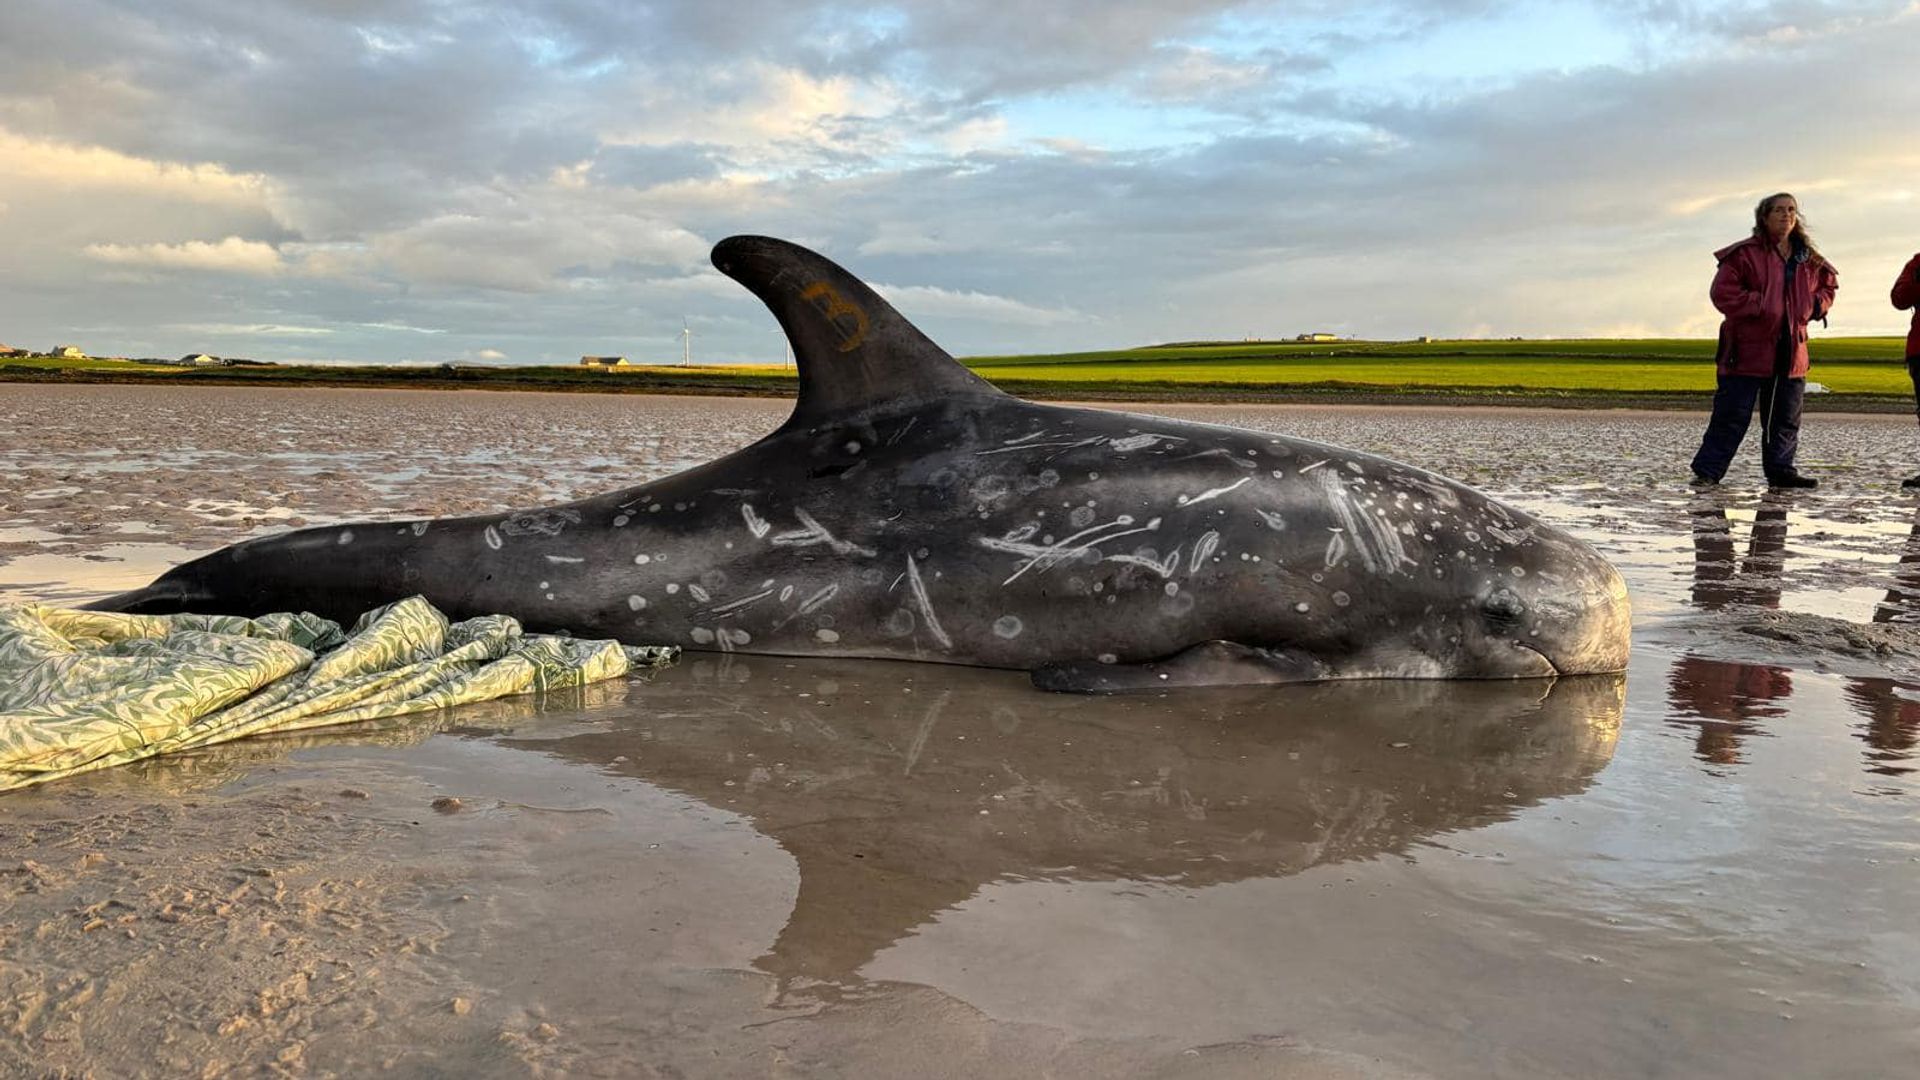 'They did an incredible job': Members of the public help save stranded dolphins